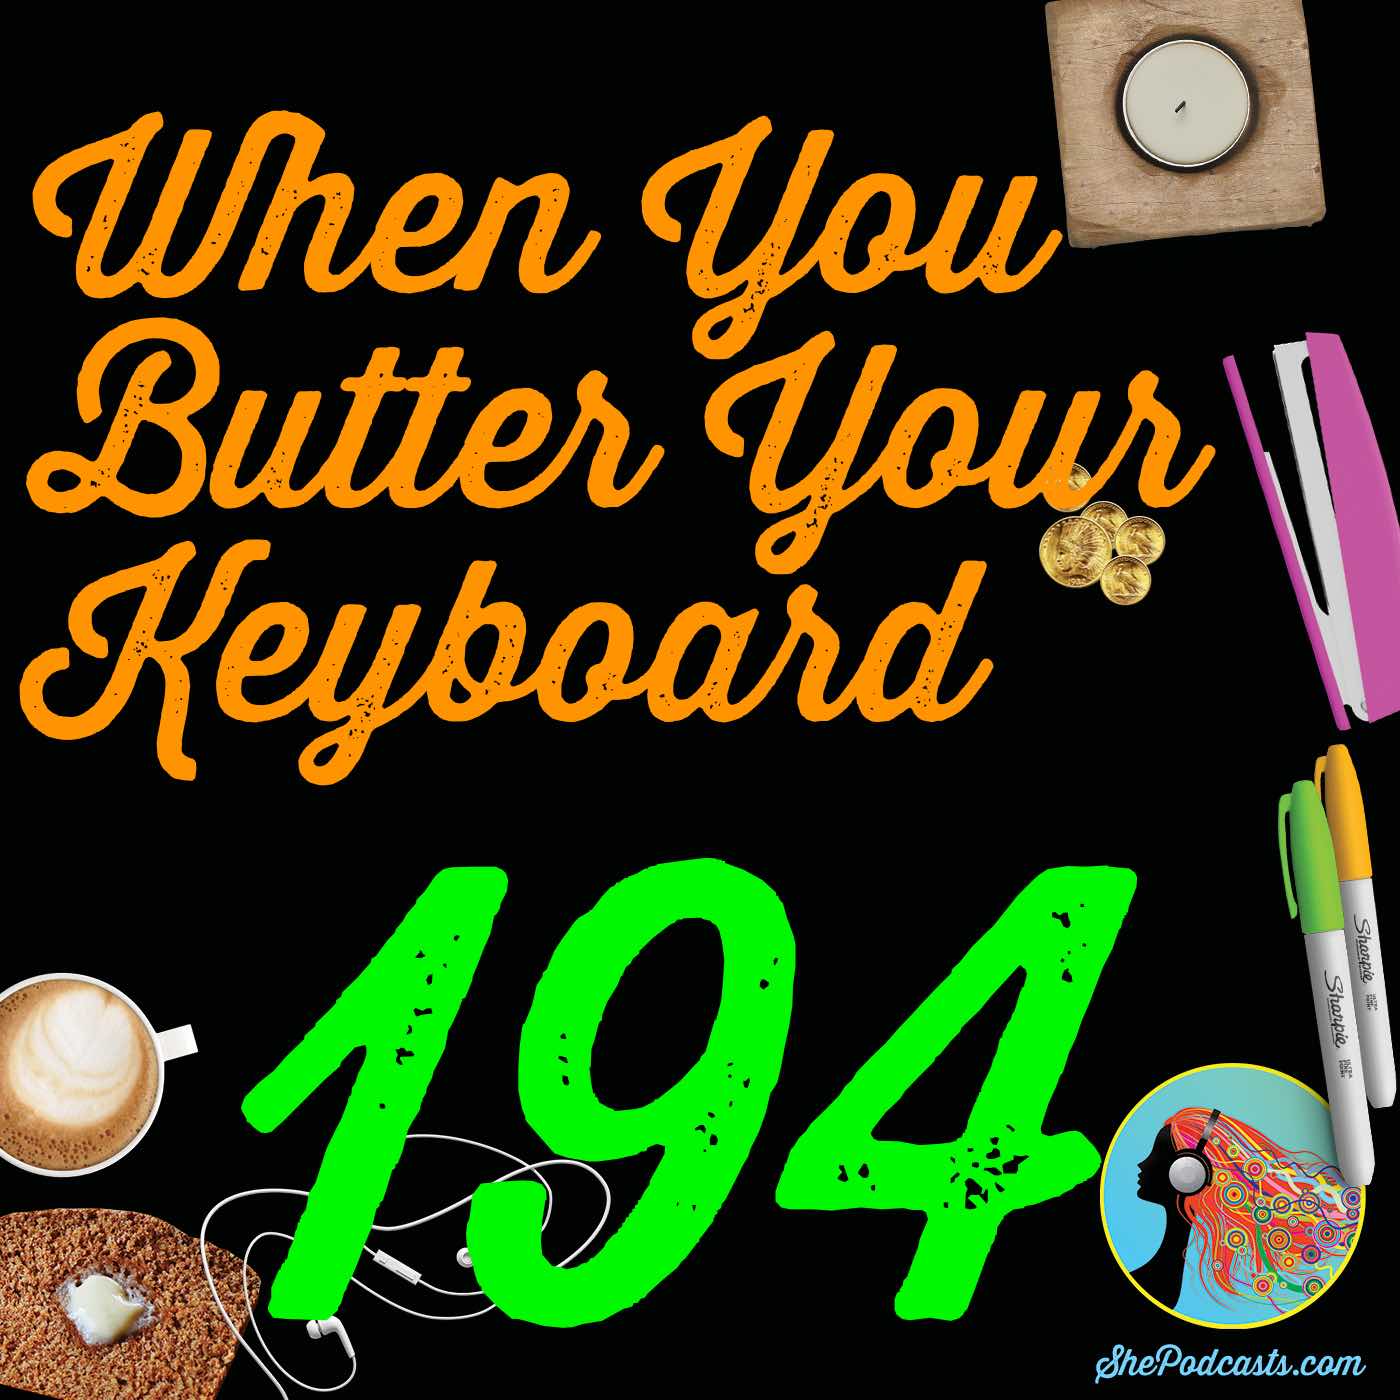 194 When You Butter Your Keyboard